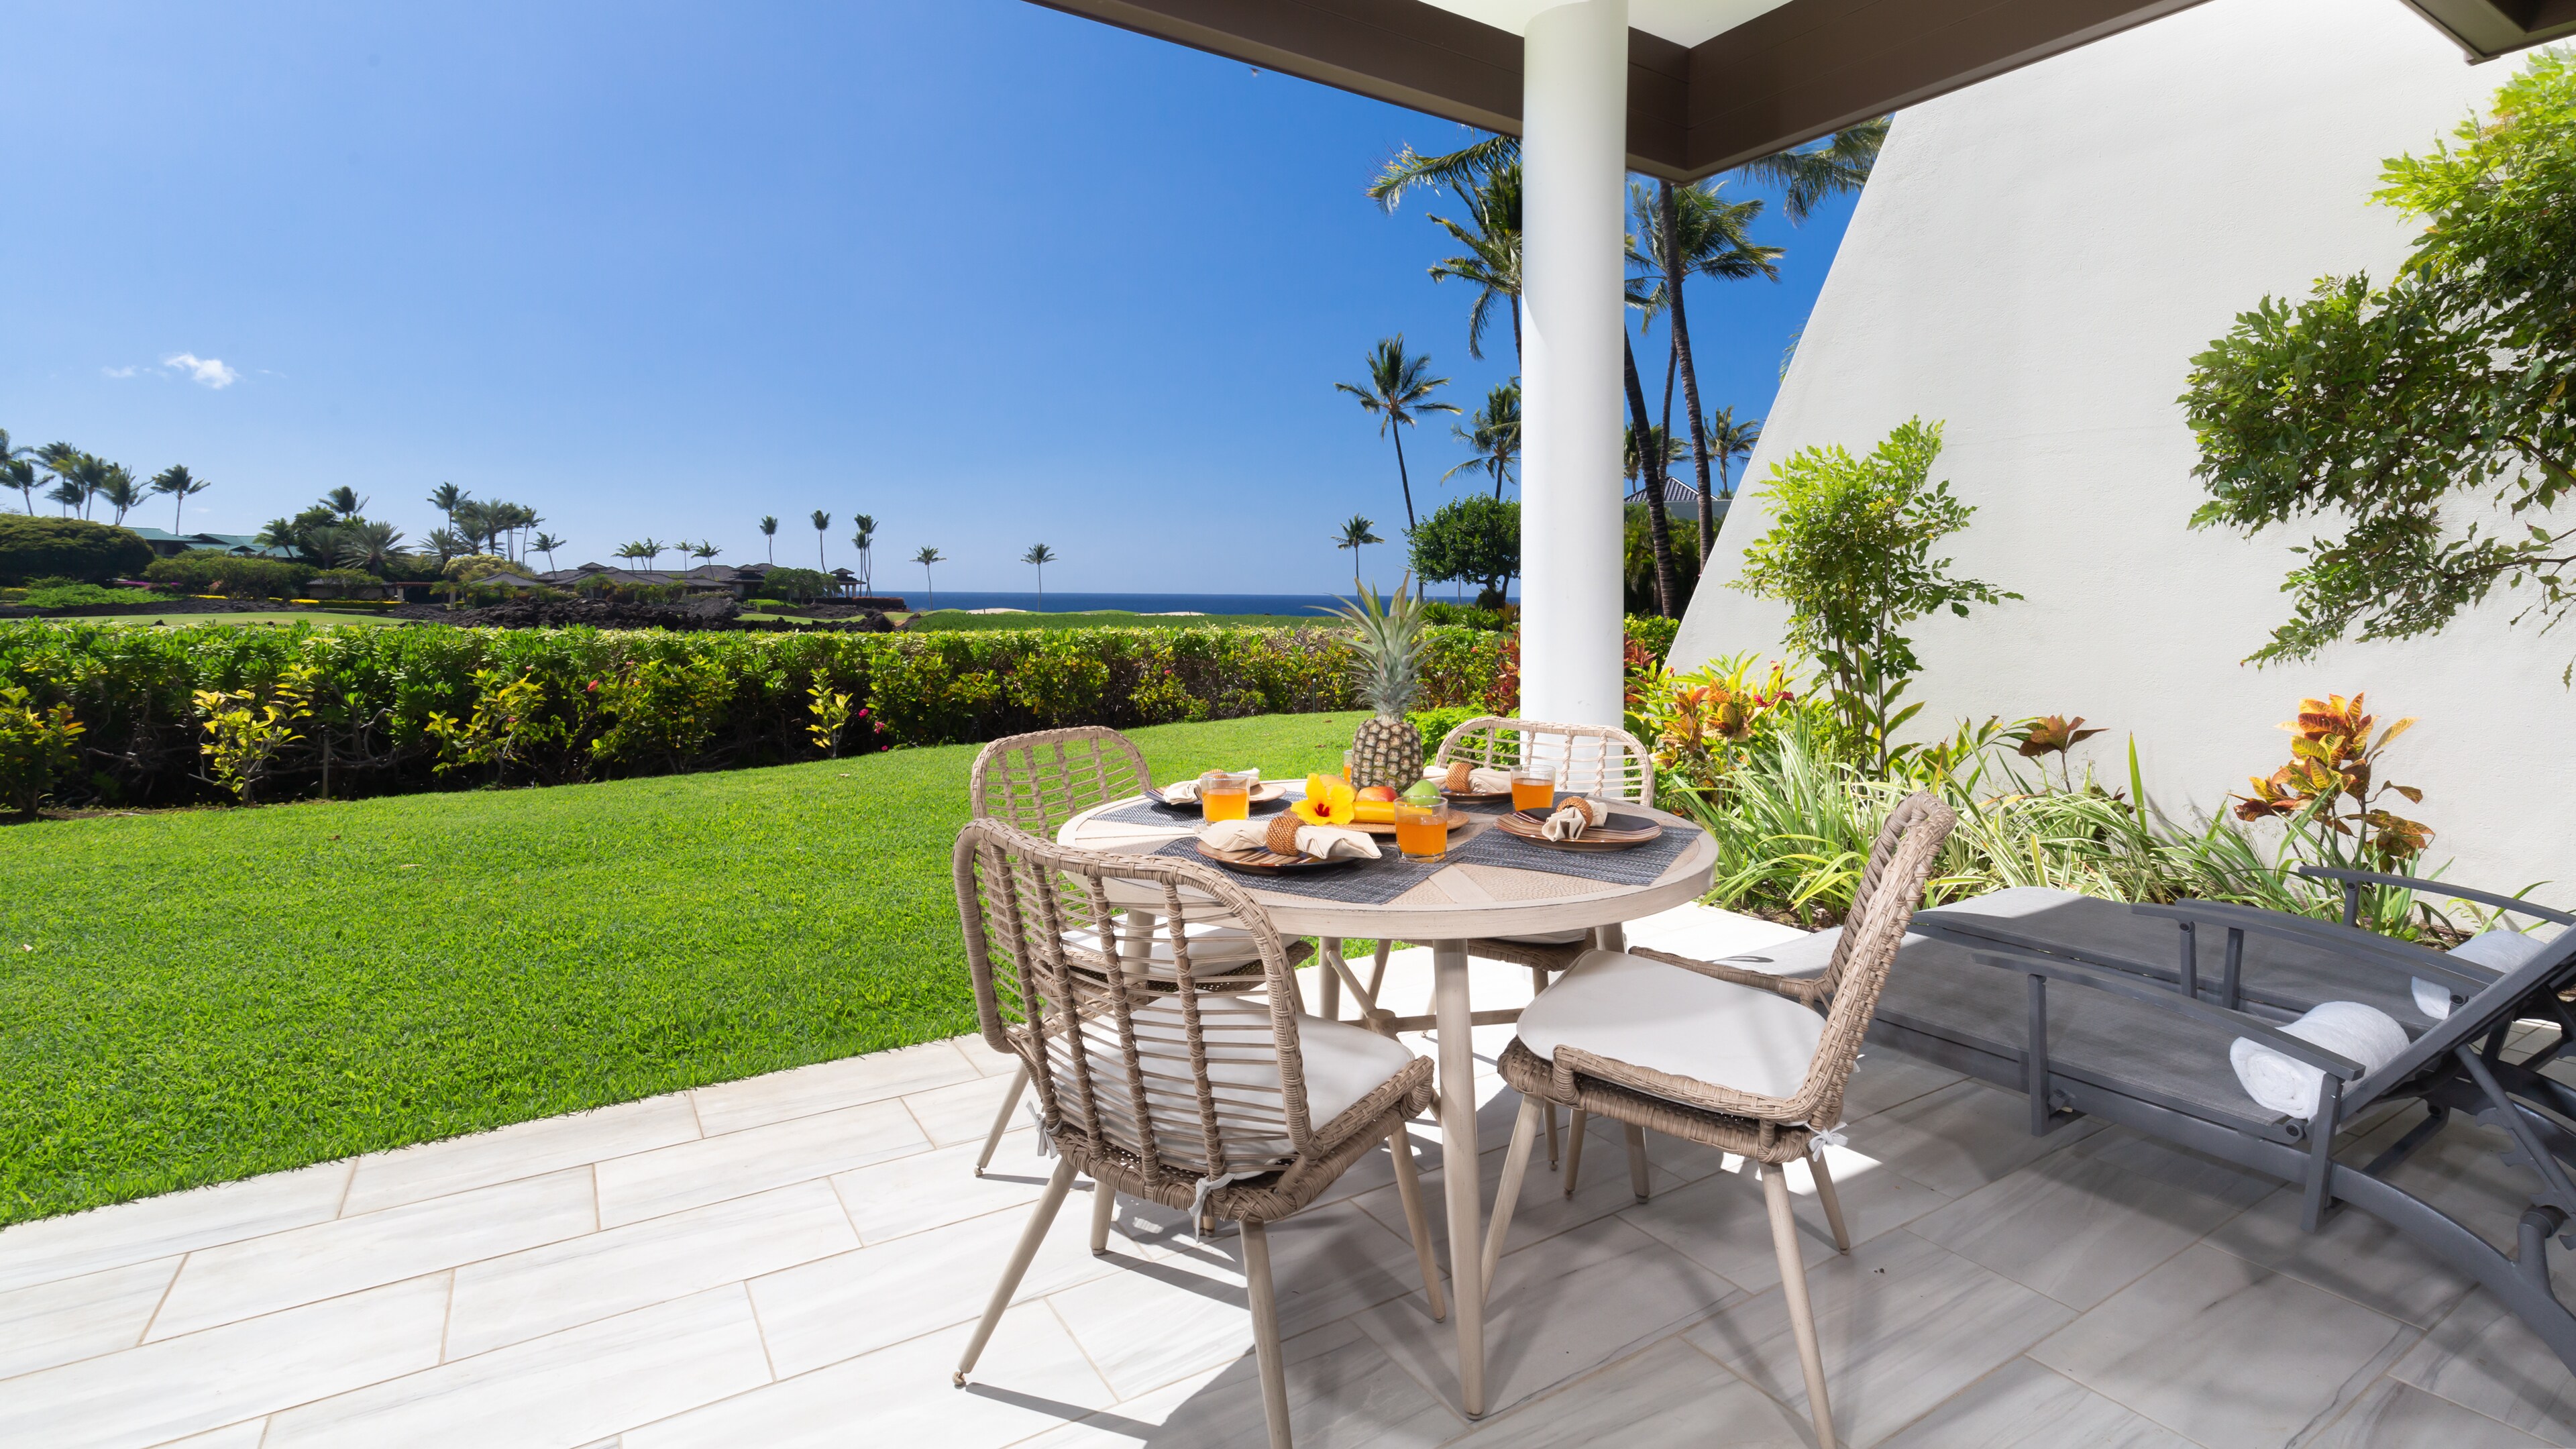 Enjoy an delicious, home-cooked meal on the lanai